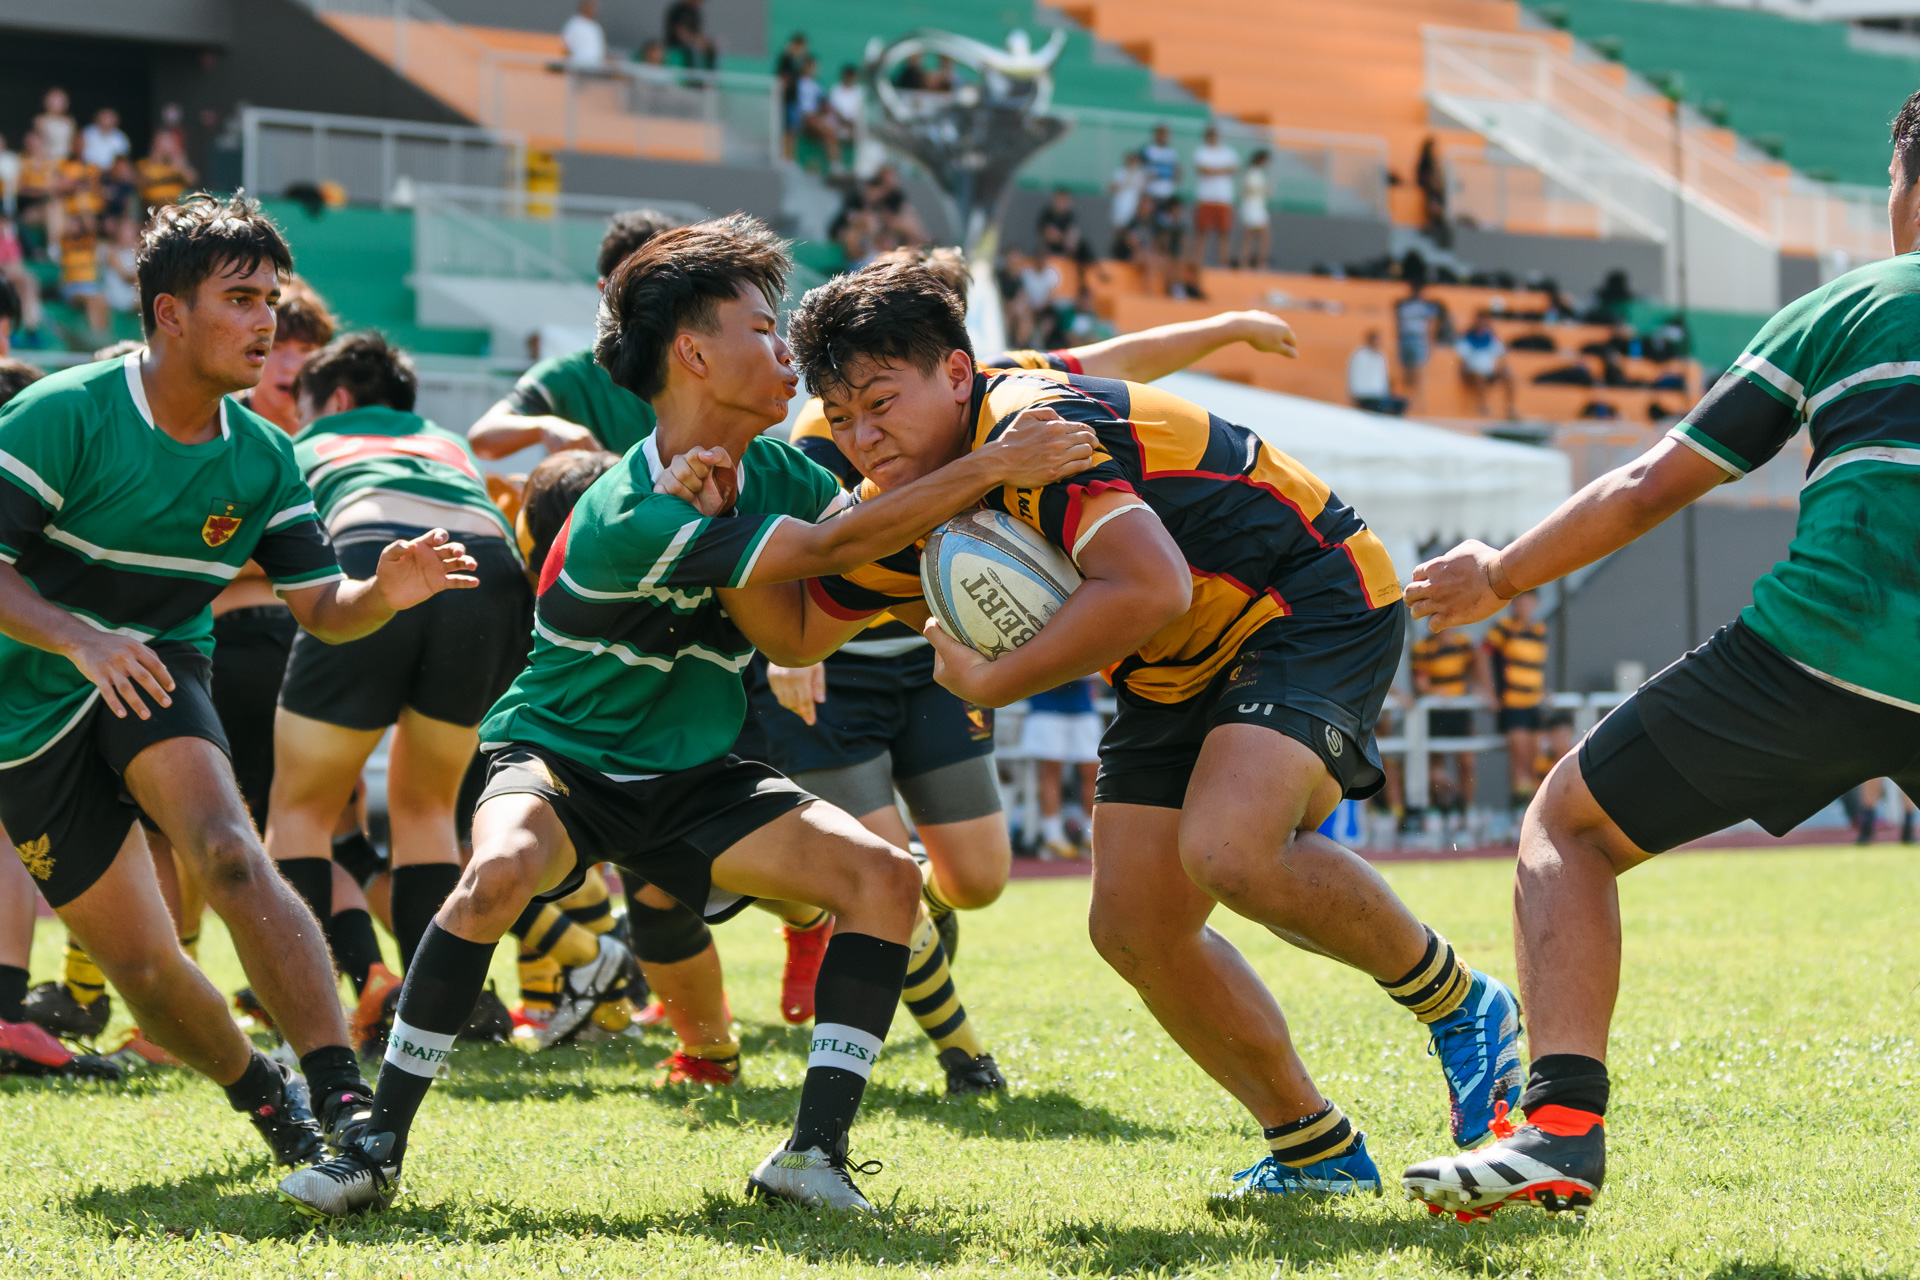 RI’s Gregory Wee (#30) attempts to stop the charge of ACS(I)’s Ames Leung (AC #1). (Photo 16 © Joash Chow/Red Sports)